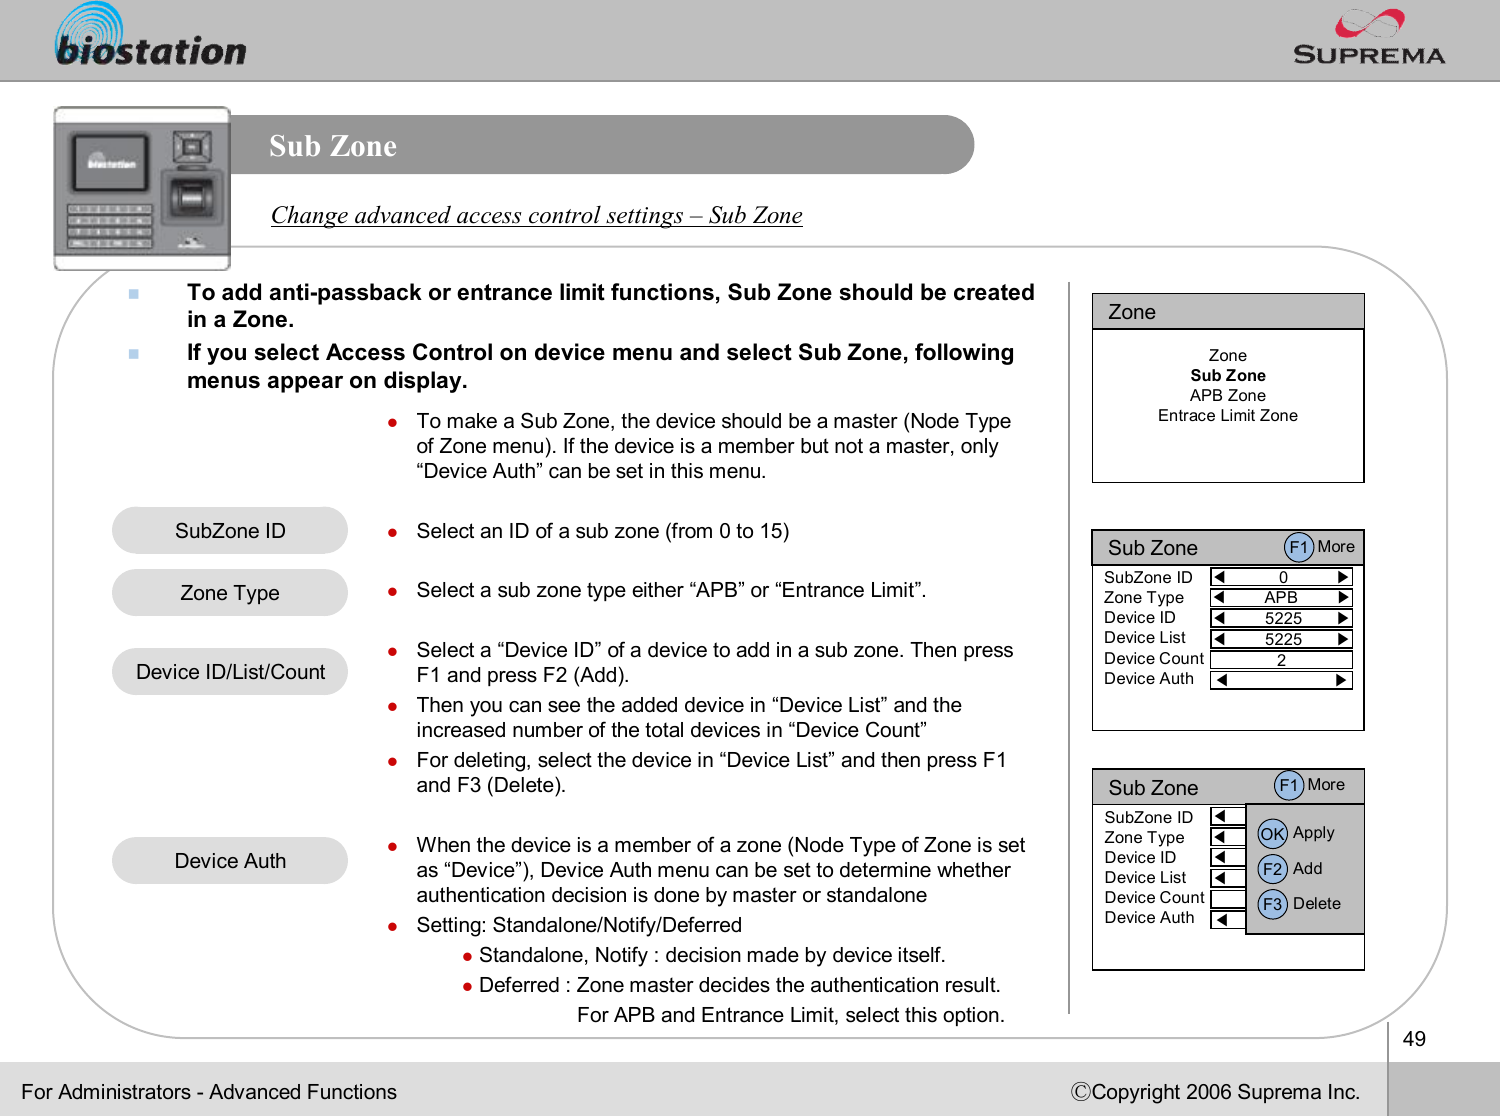 49ⒸCopyright 2006 Suprema Inc.Sub ZonenTo add anti-passbackor entrance limit functions, Sub Zone should be created in a Zone. nIf you select Access Control on device menu and select Sub Zone,following menus appear on display. Change advanced access control settings –Sub ZonelTo make a Sub Zone, the device should be a master (Node Type of Zone menu). If the device is a member but not a master, only “Device Auth”can be set in this menu.lSelect an ID of a sub zone (from 0 to 15)lSelect a sub zone type either “APB”or “Entrance Limit”.lSelect a “Device ID”of a device to add in a sub zone. Then press F1 and press F2 (Add). lThen you can see the added device in “Device List”and the increased number of the total devices in “Device Count”lFor deleting, select the device in “Device List”and then press F1 and F3 (Delete).lWhen the device is a member of a zone (Node Type of Zone is set as “Device”), Device Auth menu can be set to determine whether authentication decision is done by master or standalonelSetting: Standalone/Notify/DeferredlStandalone, Notify : decision made by device itself.lDeferred : Zone master decides the authentication result.    For APB and Entrance Limit, select this option.SubZoneIDZone TypeDevice ID/List/CountFor Administrators -Advanced FunctionsZoneZoneSub ZoneAPB ZoneEntrace Limit ZoneSub Zone◀0          ▶SubZone IDZone TypeDevice IDDevice ListDevice CountDevice Auth◀5225       ▶◀5225       ▶◀ ▶◀APB        ▶2F1 MoreSub Zone◀0          ▶SubZone IDZone TypeDevice IDDevice ListDevice CountDevice Auth◀5225       ▶◀5225       ▶◀ ▶◀APB        ▶2OK ApplyF2 AddF3 DeleteF1 MoreDevice Auth